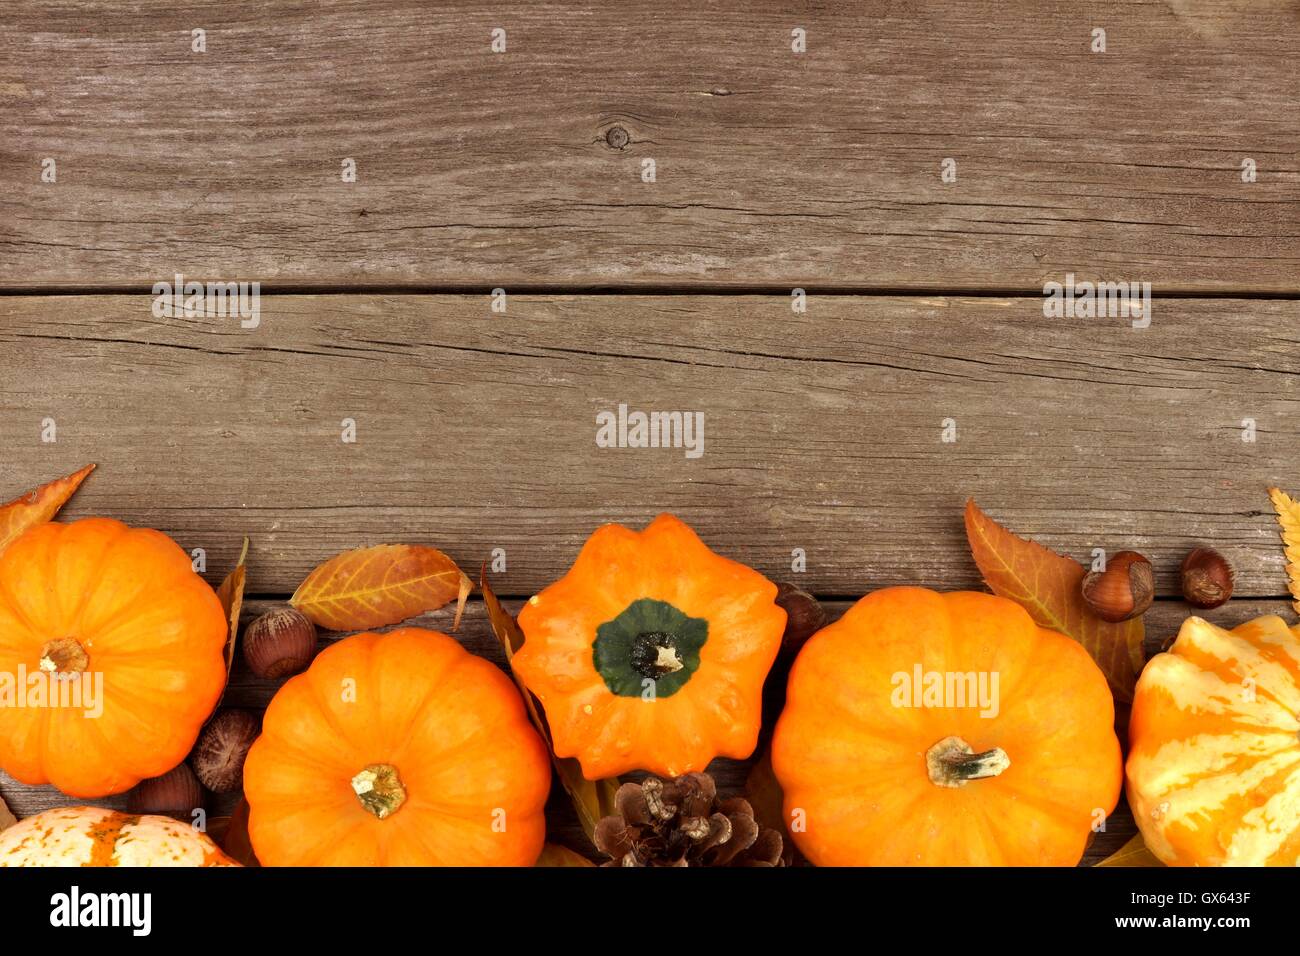 Autumn border of pumpkins and leaves against a rustic old wood background Stock Photo